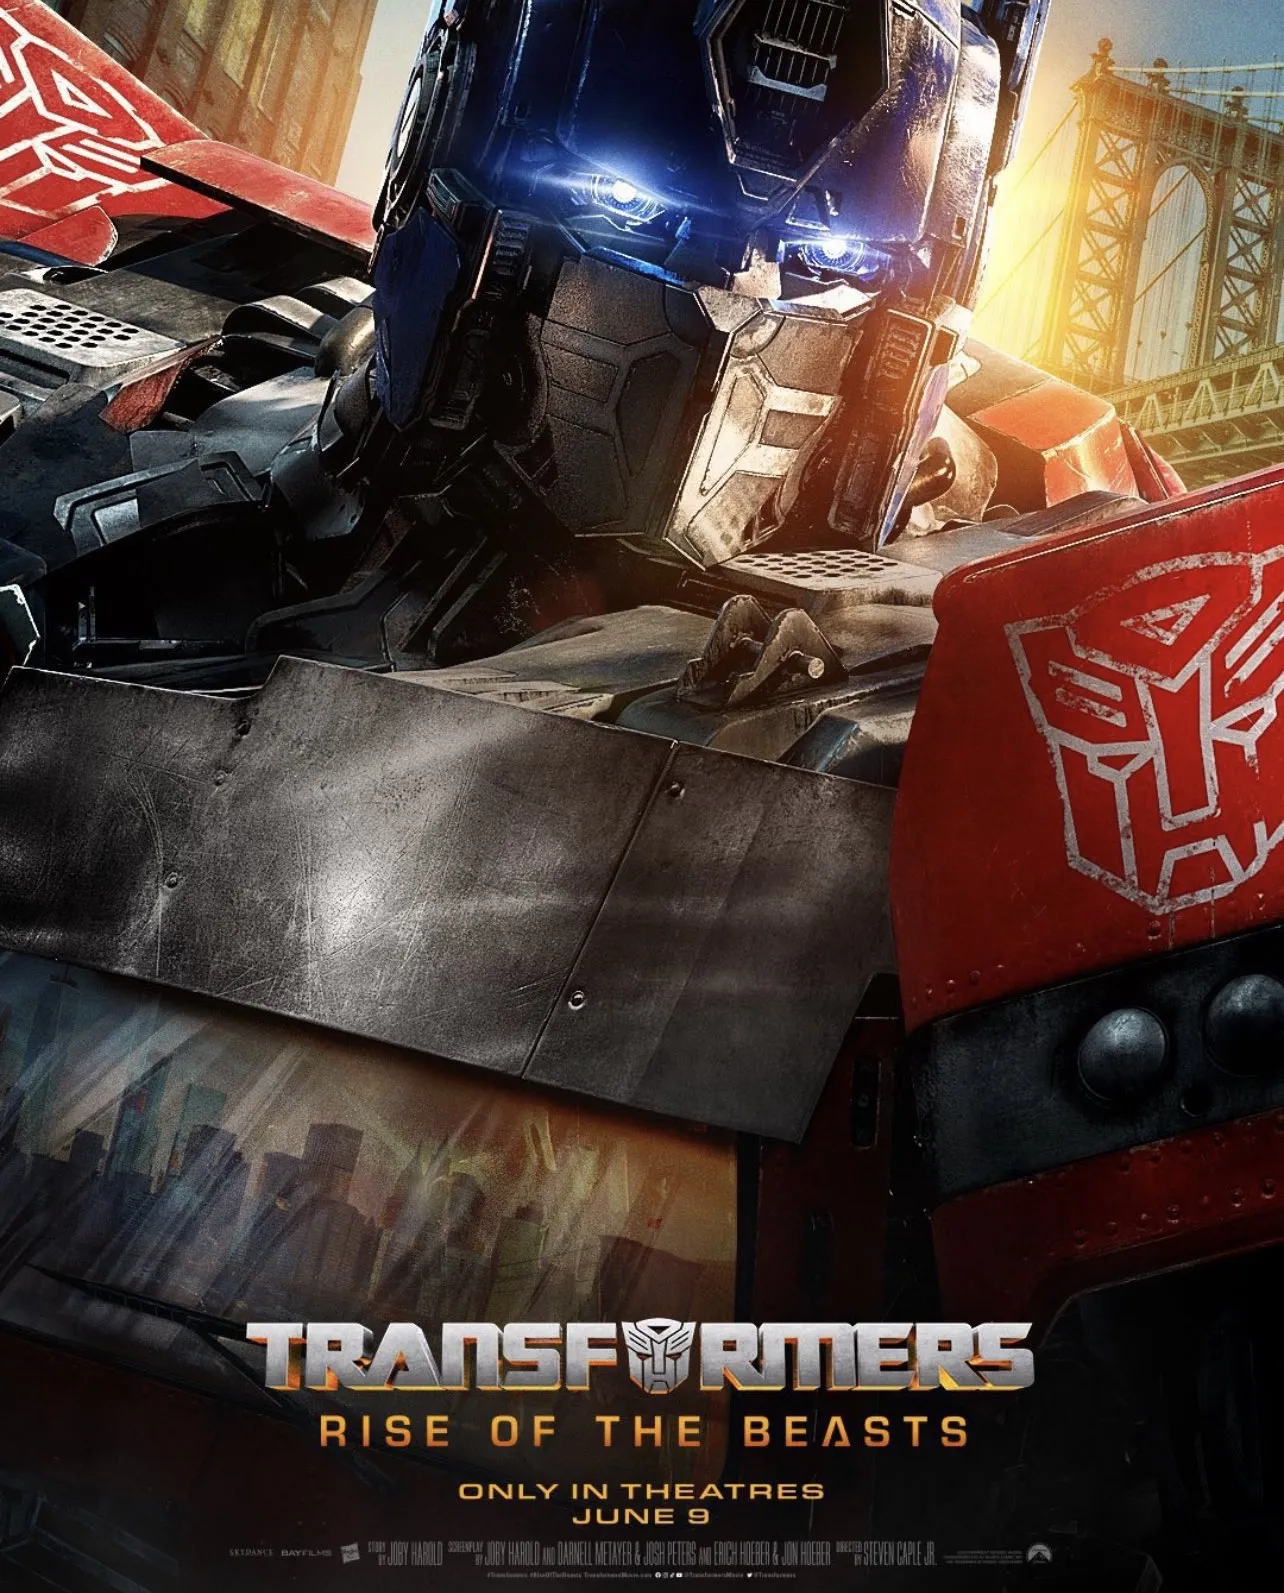 8c45b94f 0731 4dec b17e 654a06bebe2d 96668 00002336a549f32c file Divulgado pôster oficial para Transformers: Rise Of The Beasts.